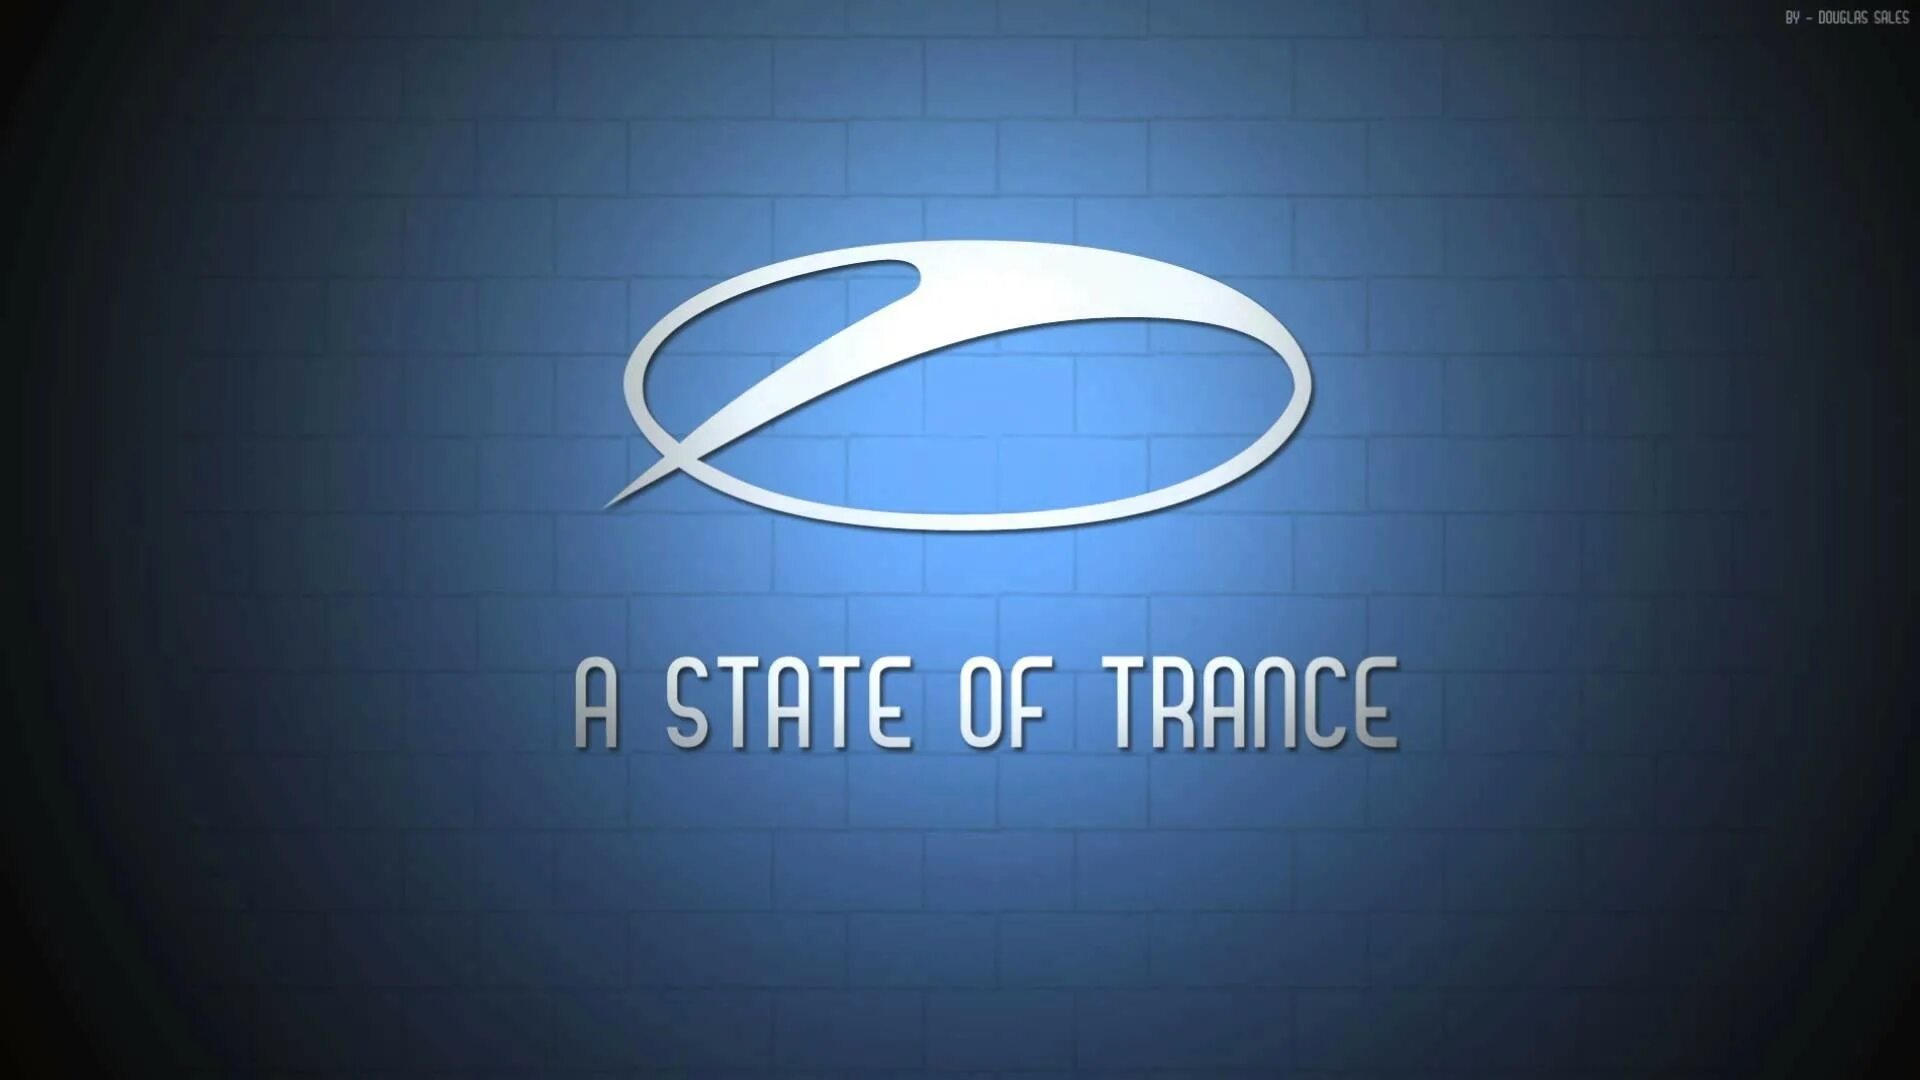 A State of Trance. ASOT эмблема. A State of Trance логотип. ASOT обои. State of trance live